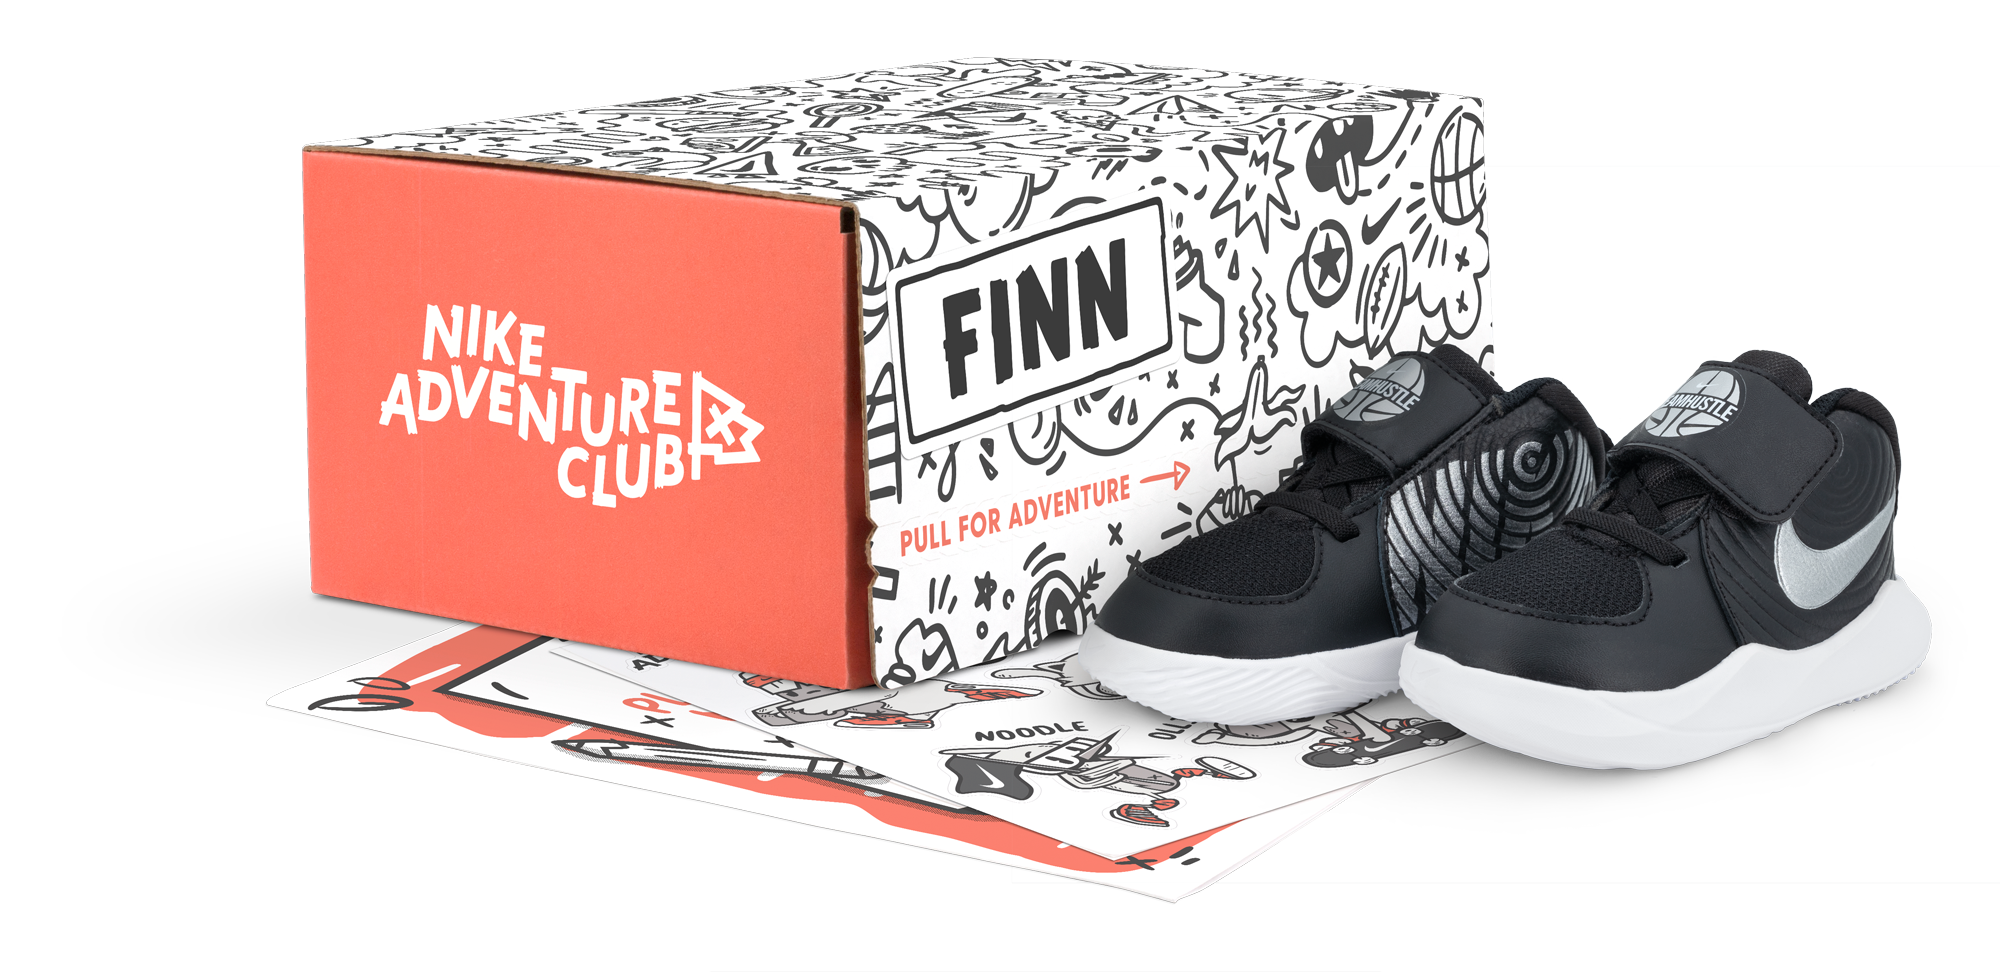 Nike is entering the subscription business with a kids' sneaker club